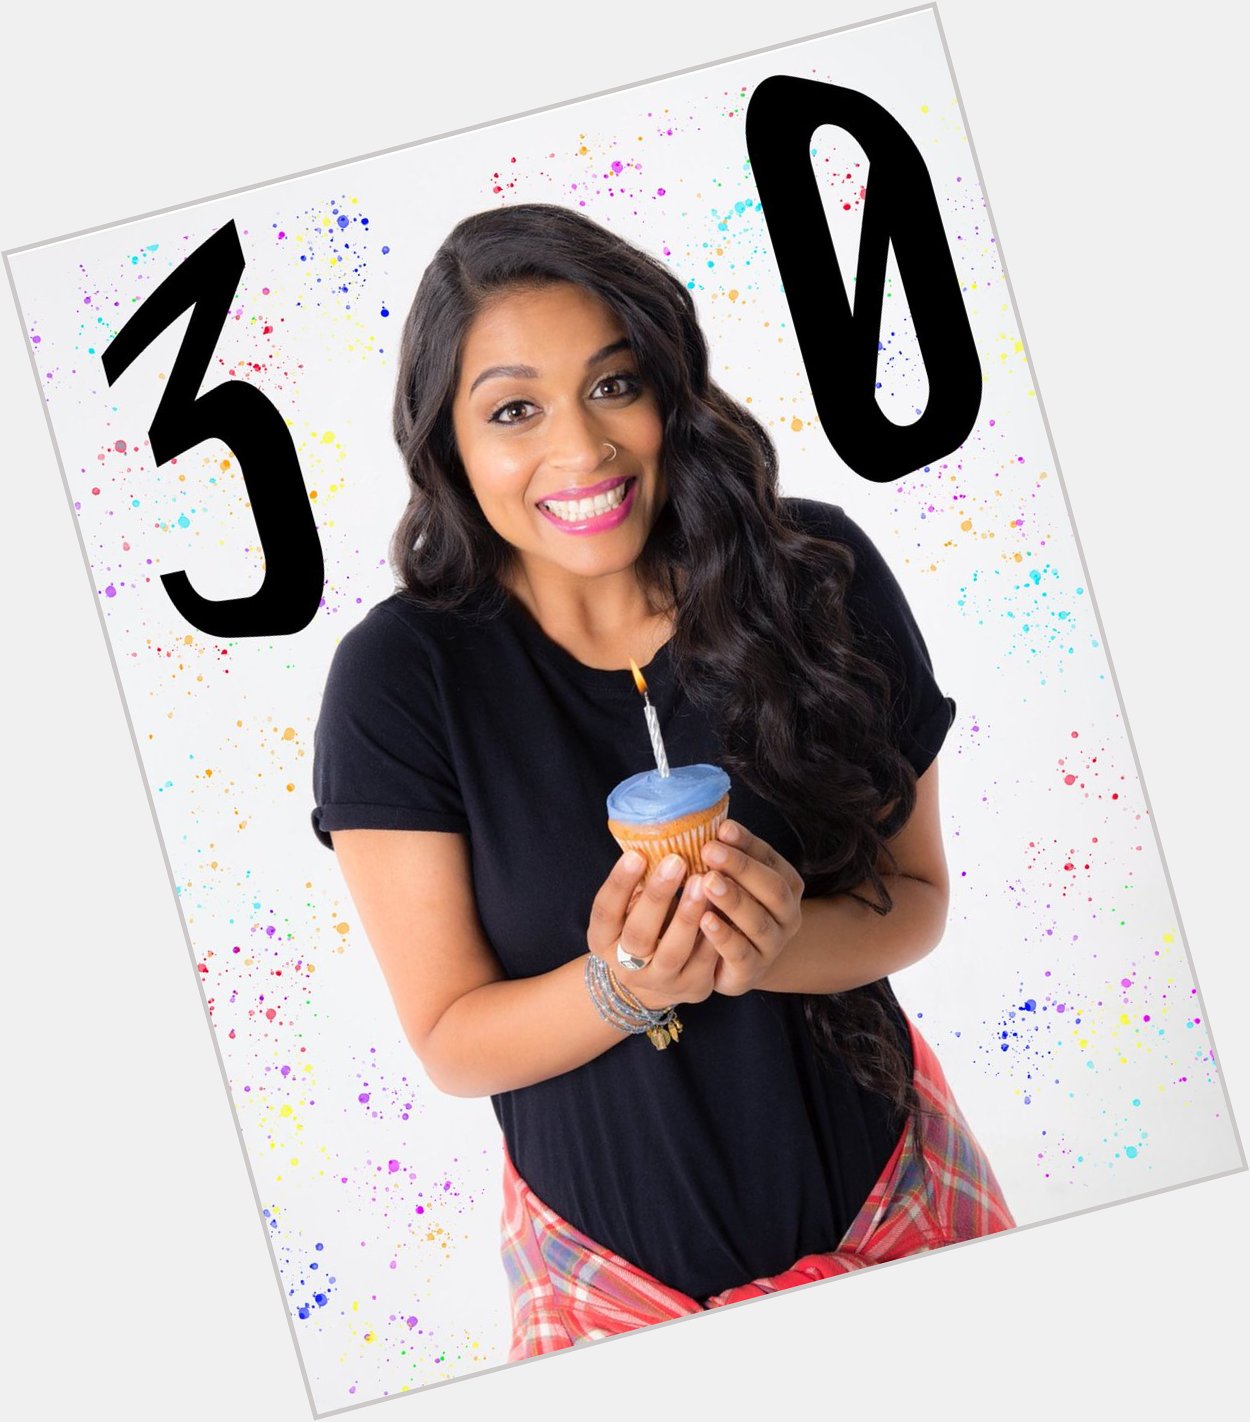 Happy birthday to the lovely Lilly Singh! 